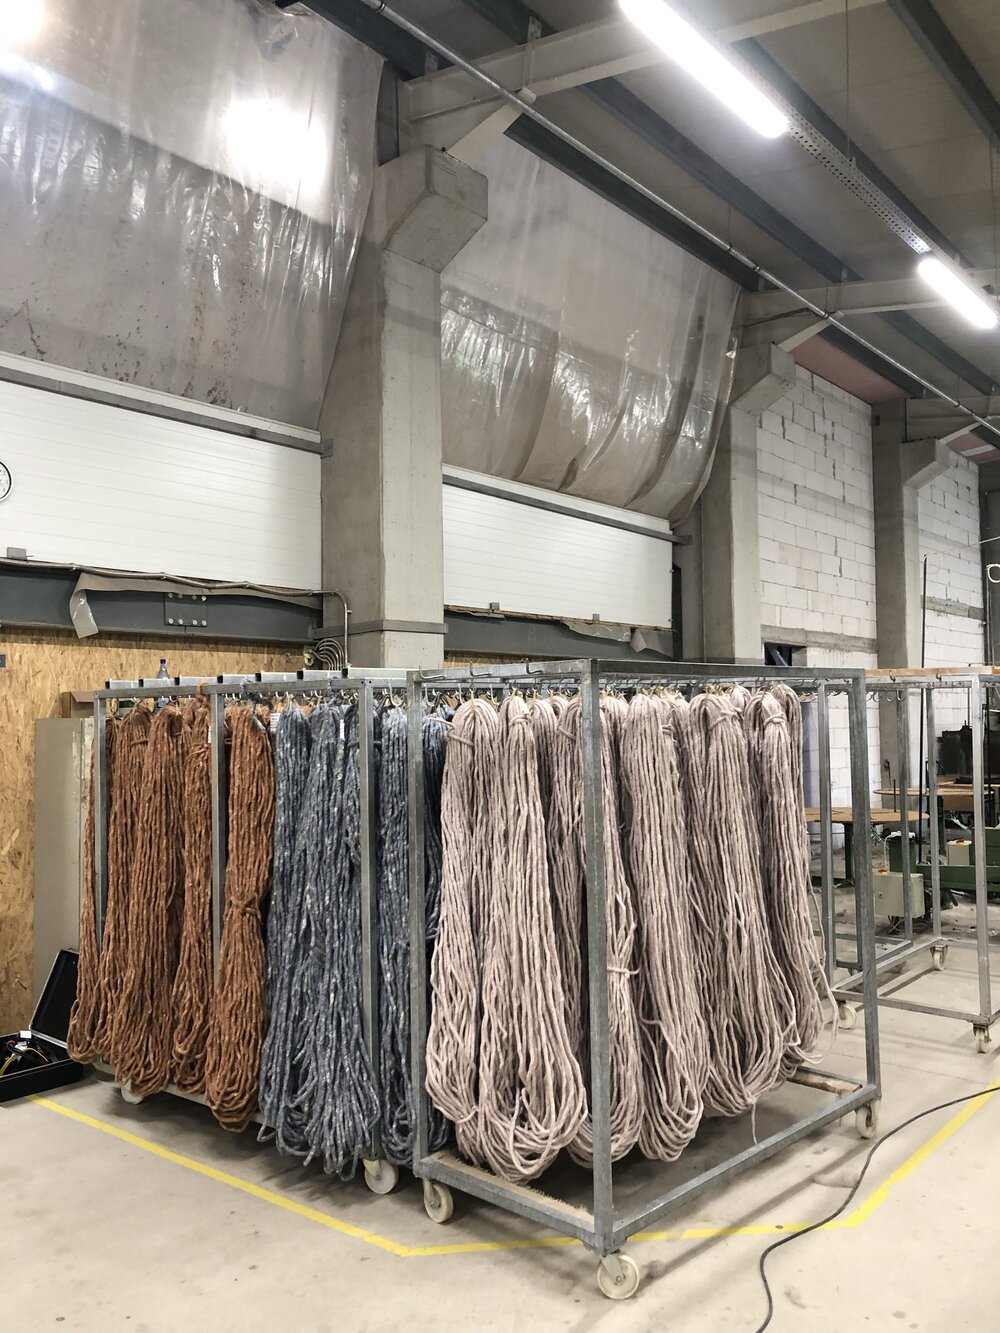 Wool being hung to dry